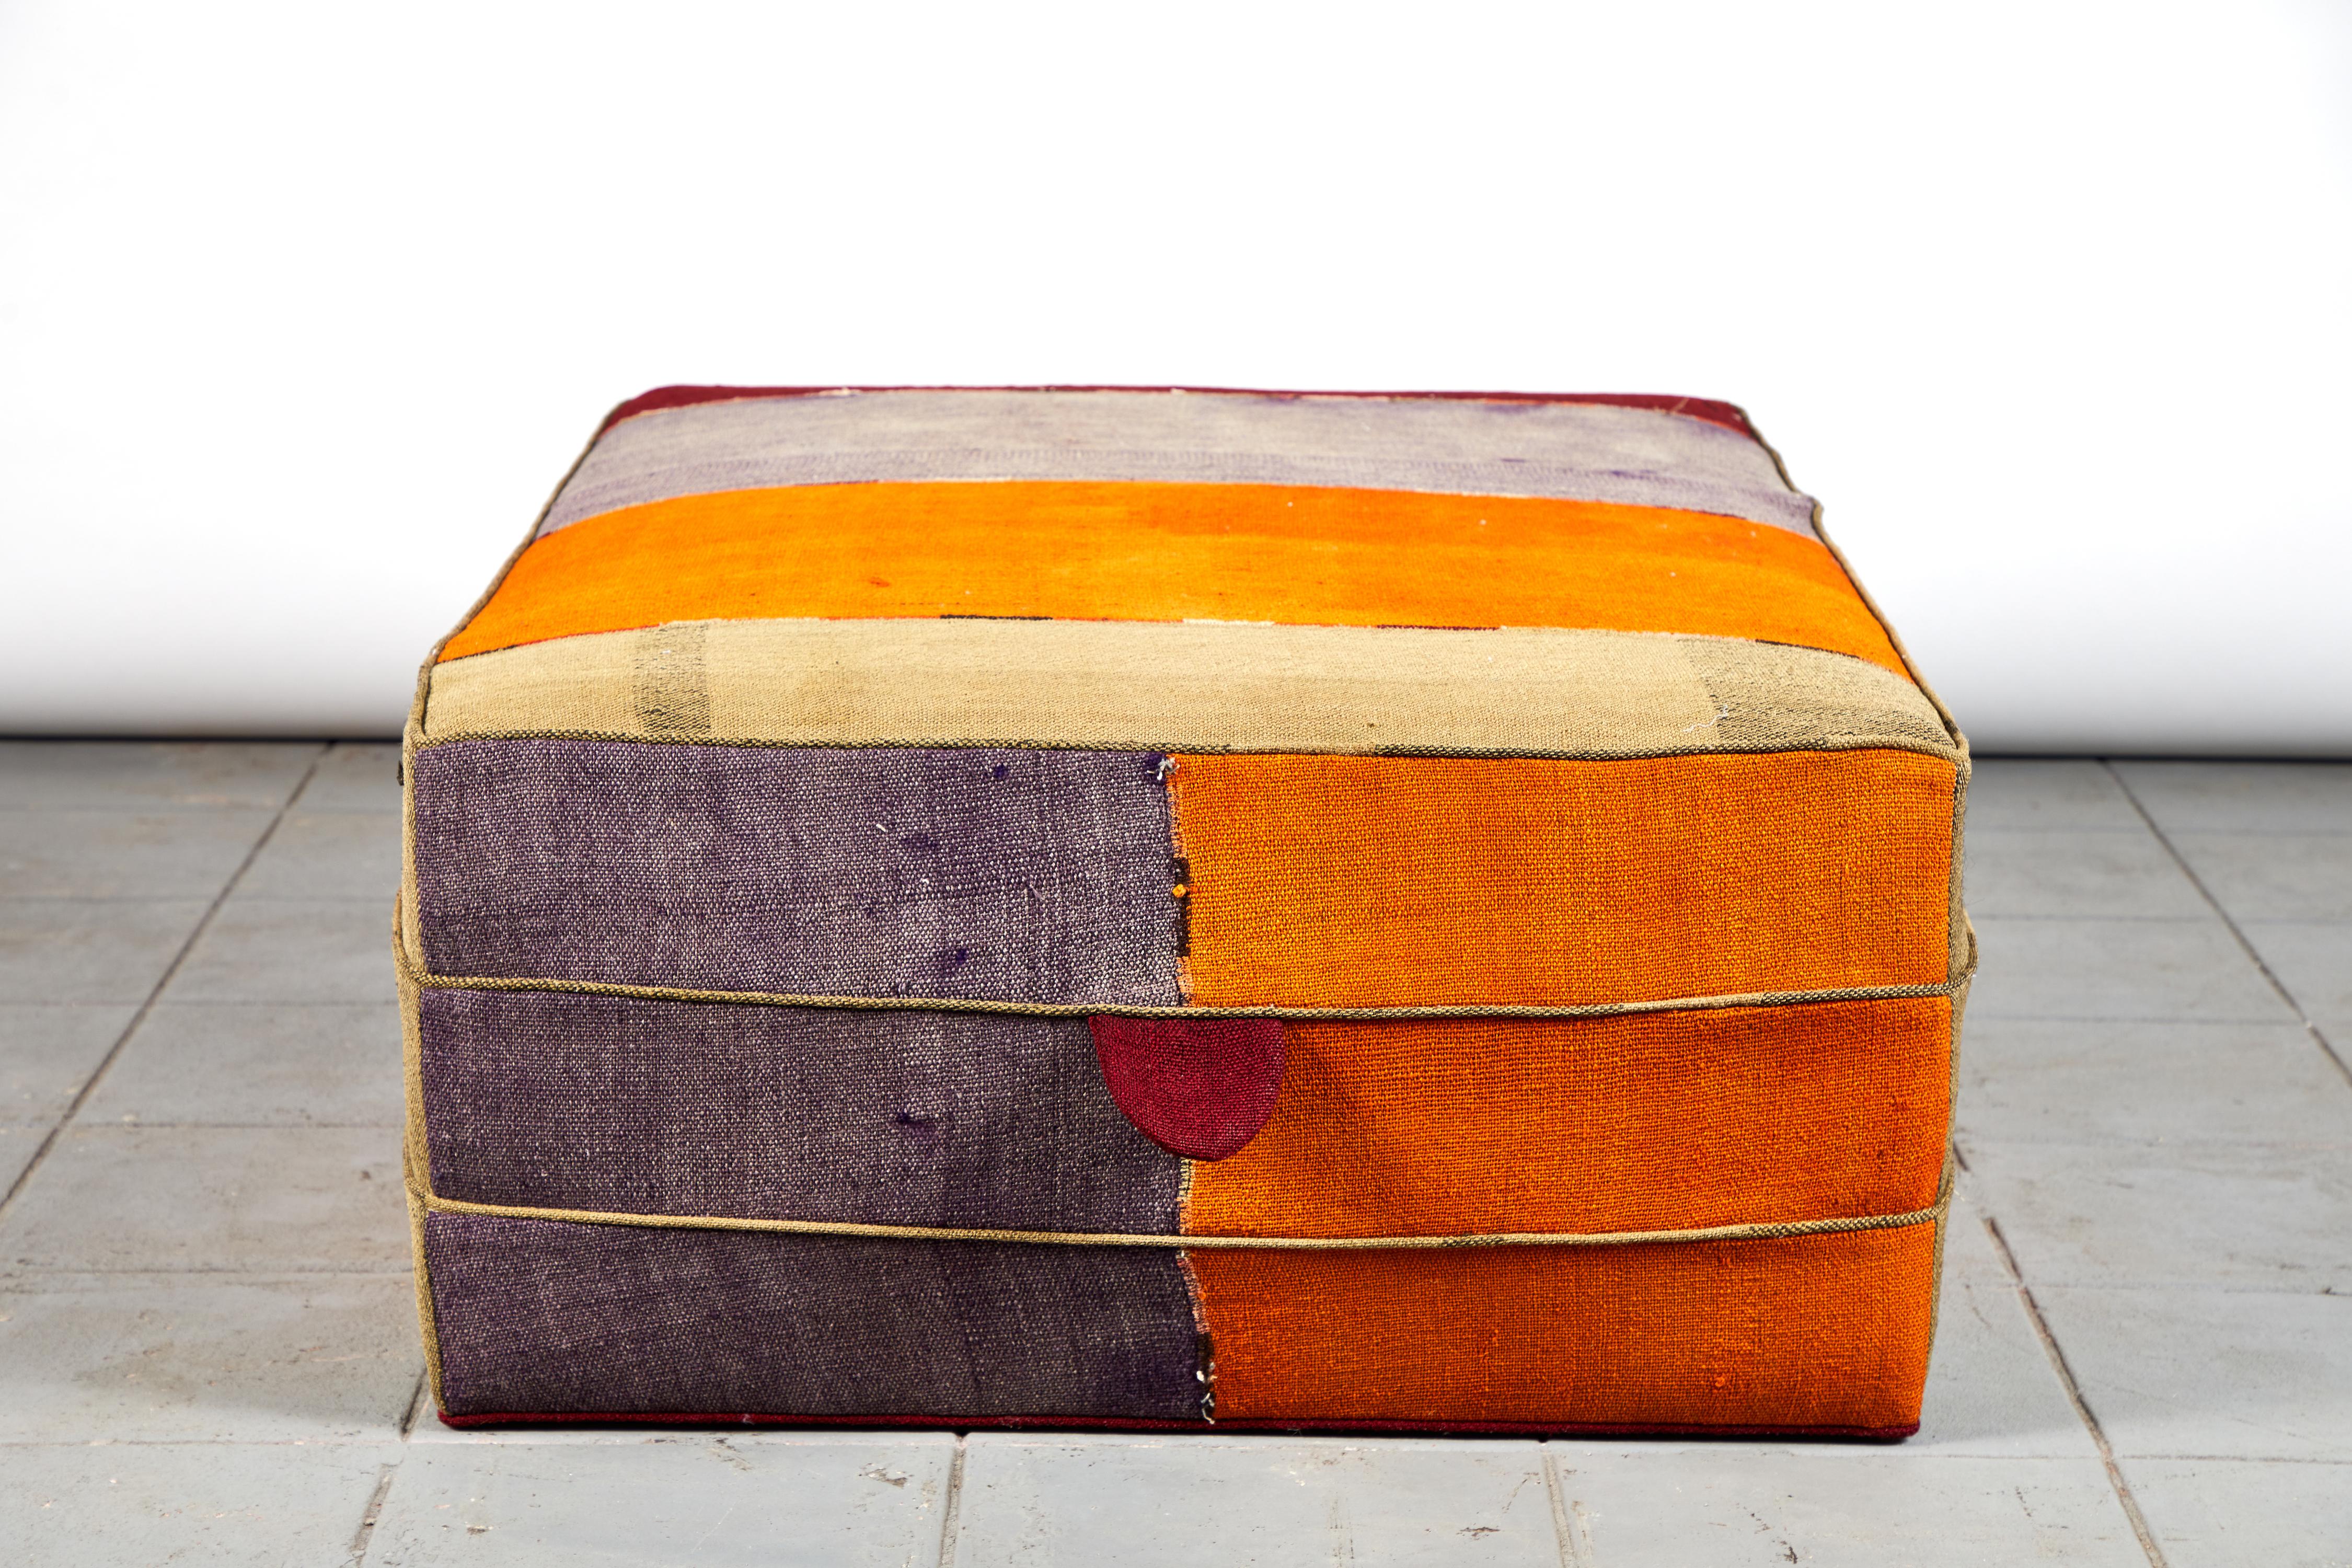 Nickey Kehoe collection rectangular ottoman in vintage Turkish colorful fabric with vibrant shades of orange, red, green and violet.
  